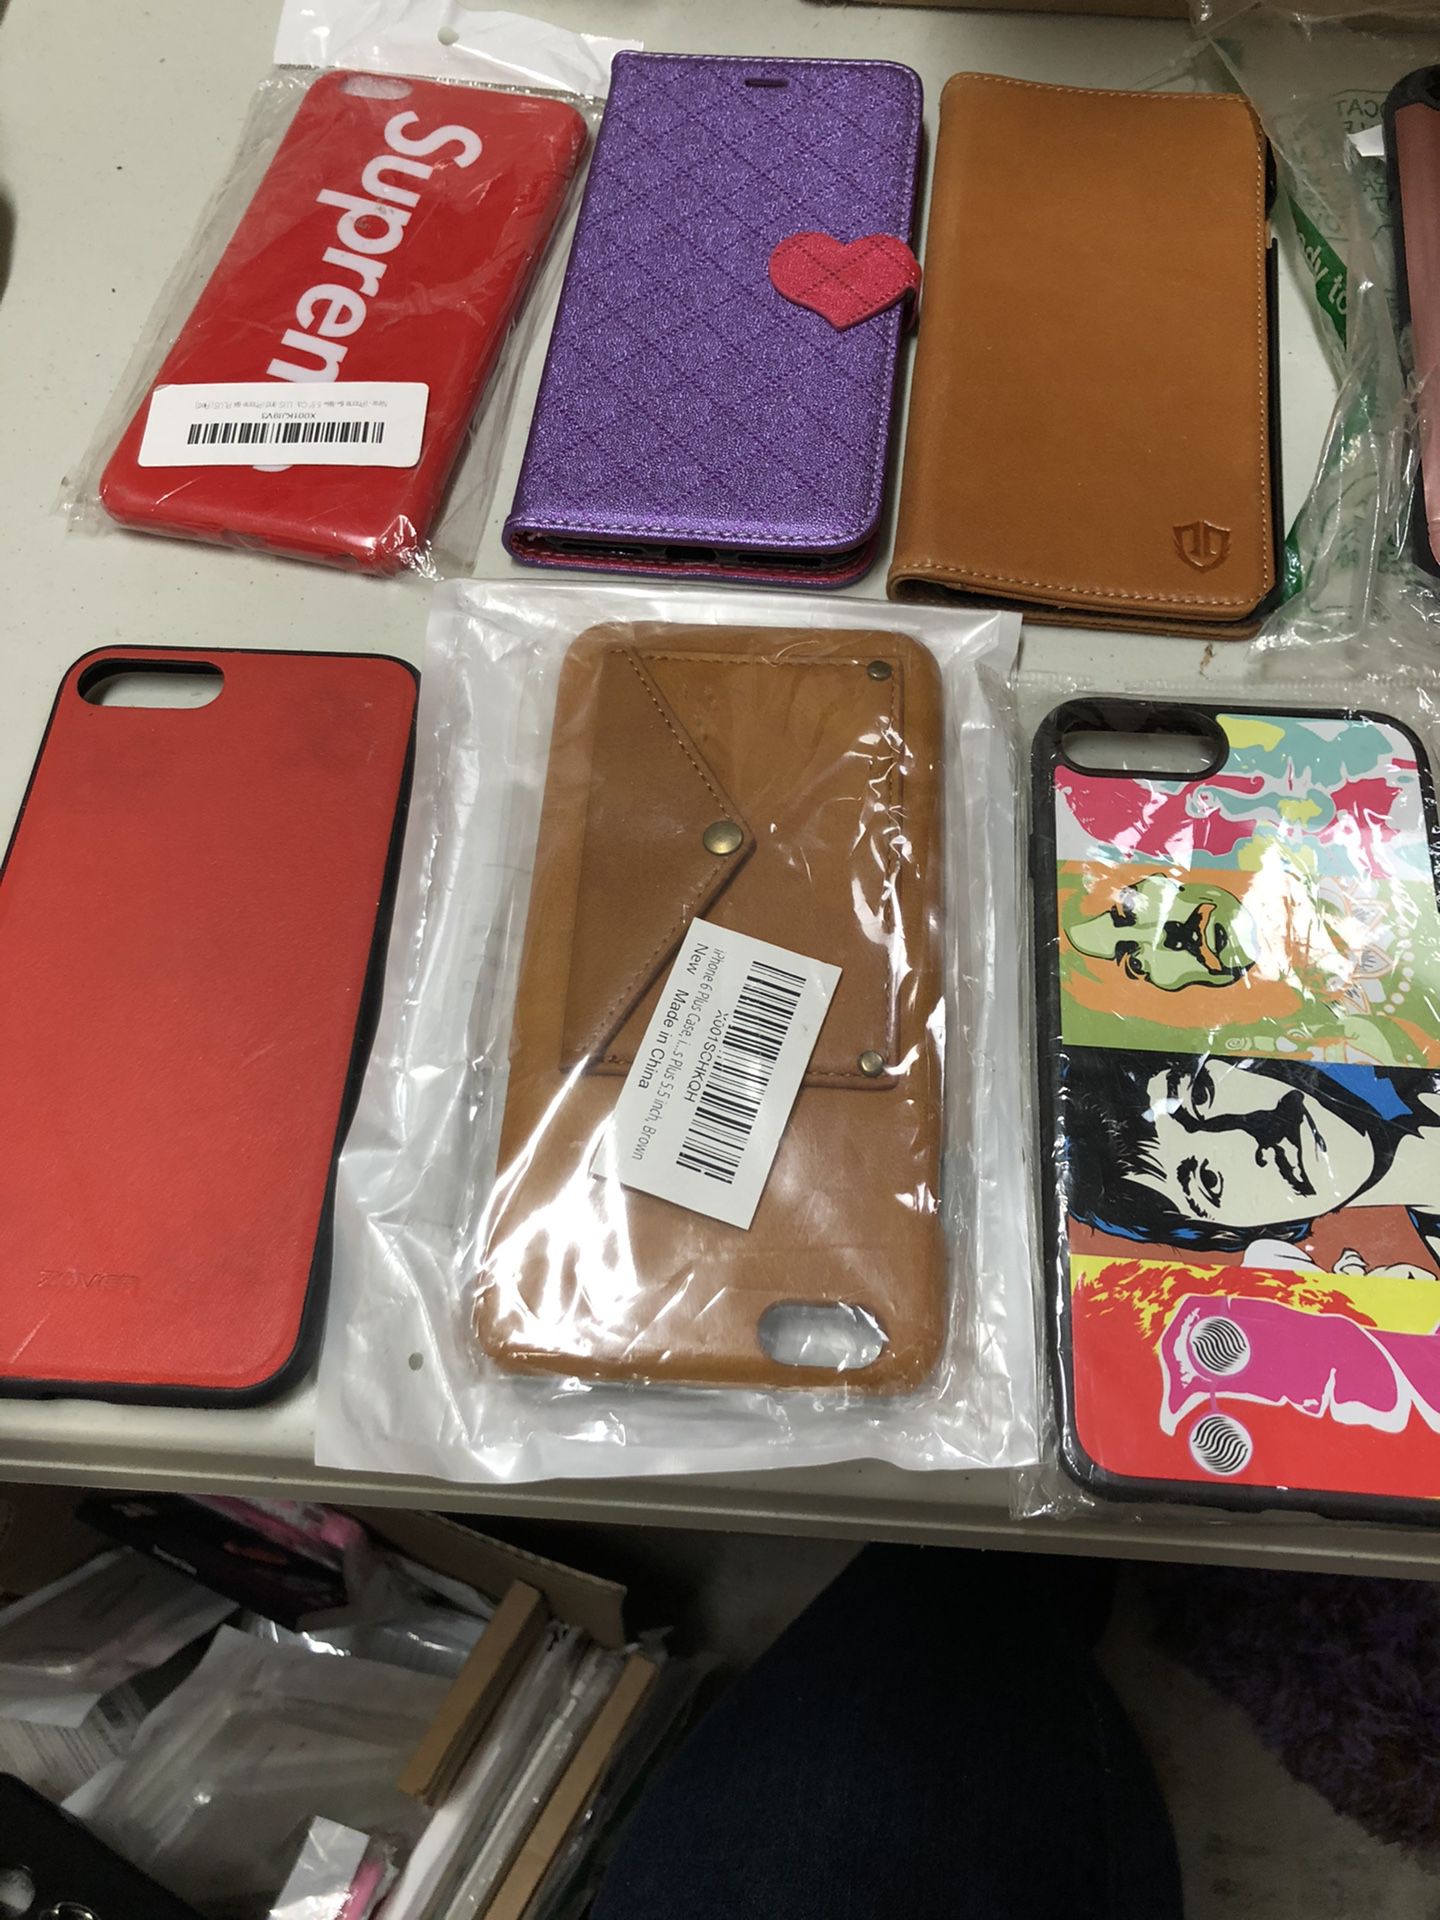 iPhone 6+ 7+ 8+ plus cellphone cases 2 for $10